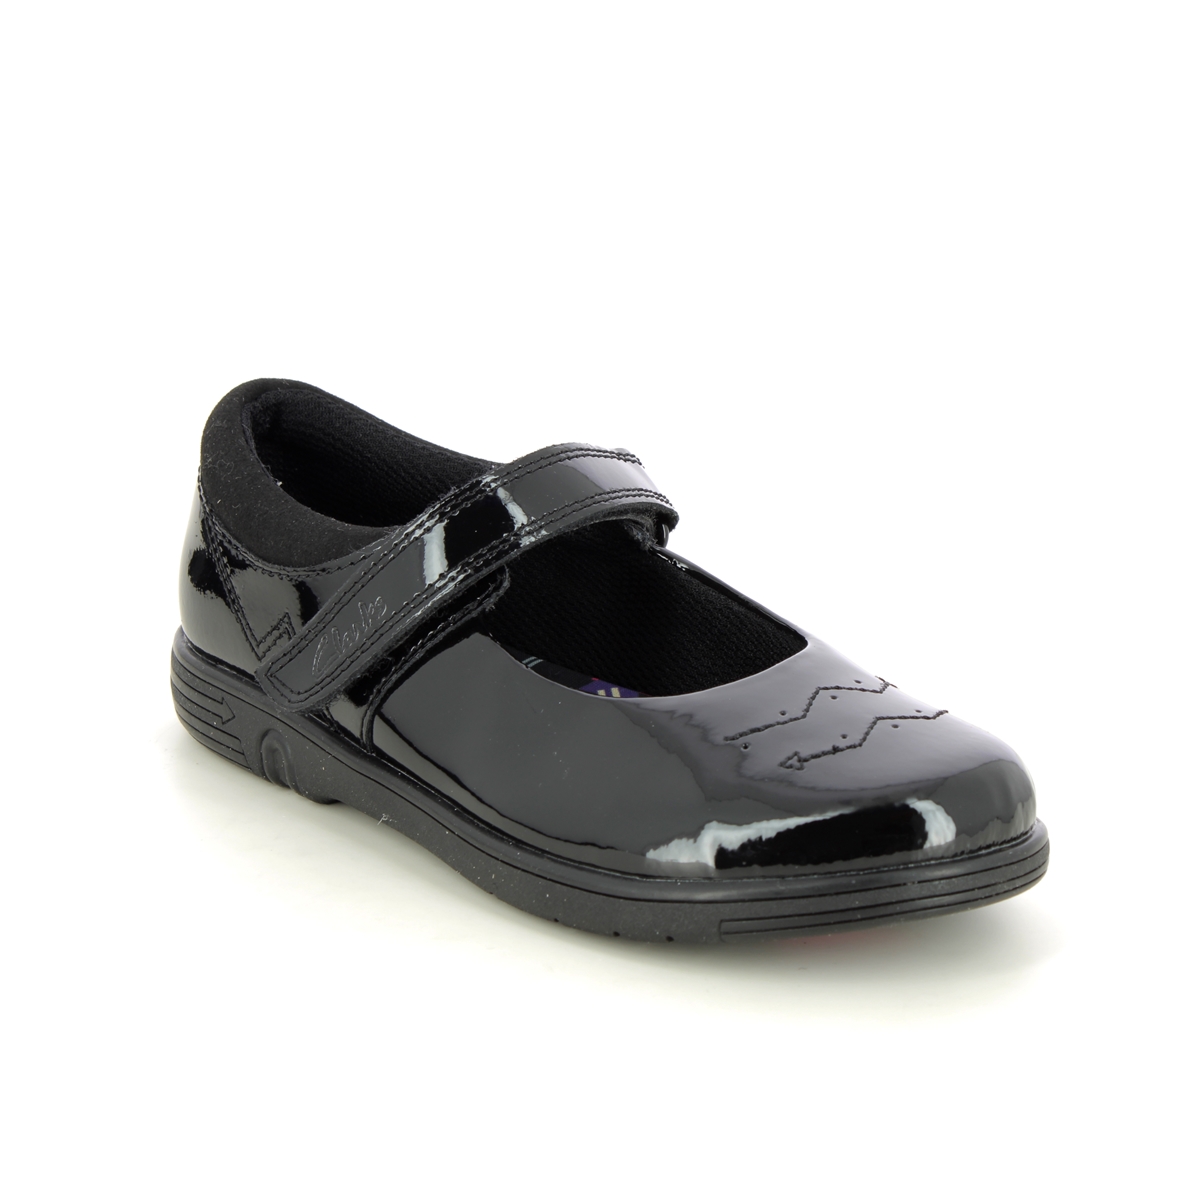 Clarks Jazzy Jig K Mary Jane Black Patent Kids Girls School Shoes 753086F In Size 2 In Plain Black Patent F Width Fitting Regular Fit For School For k